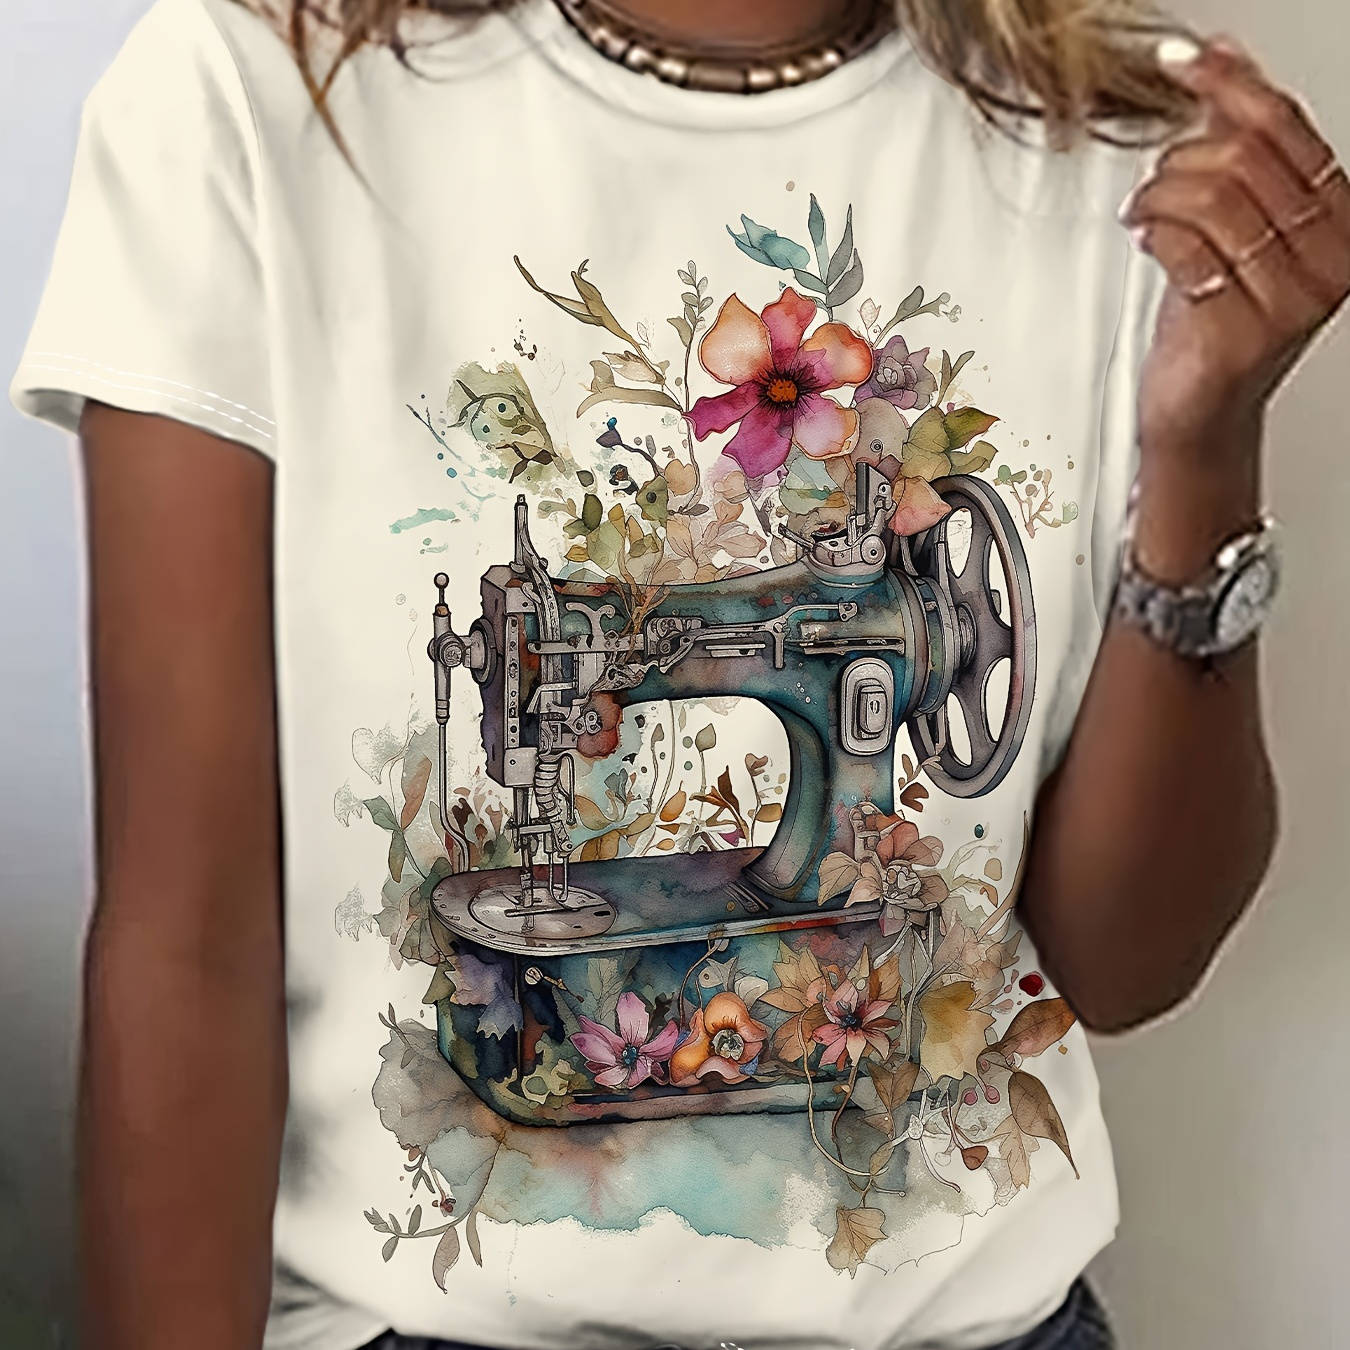 

Vintage Graphic Print Crew Neck T-shirt, Casual Short Sleeve T-shirt For Spring & Summer, Women's Clothing